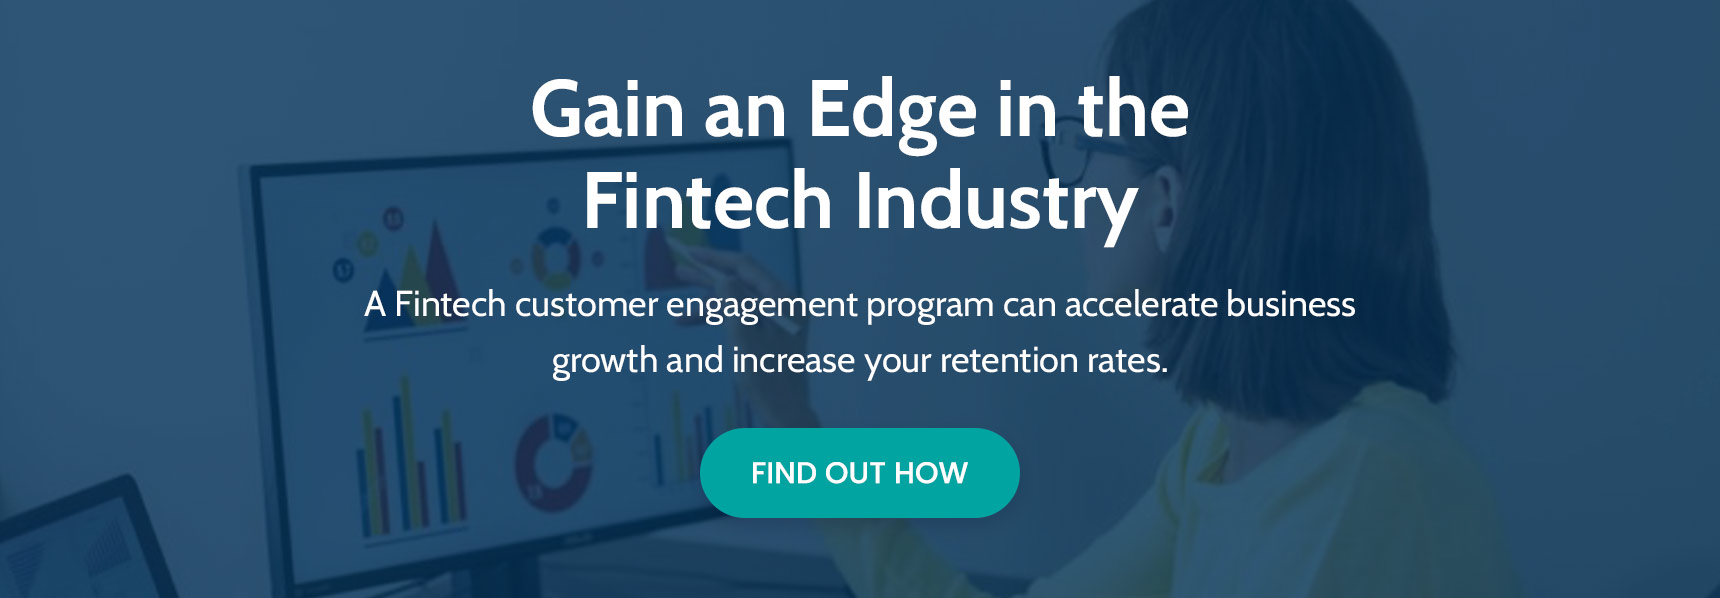 gain an edge in the fintech industry. a fintech customer engagement program can accelerate business growth and increase your retention rates. click to find out how